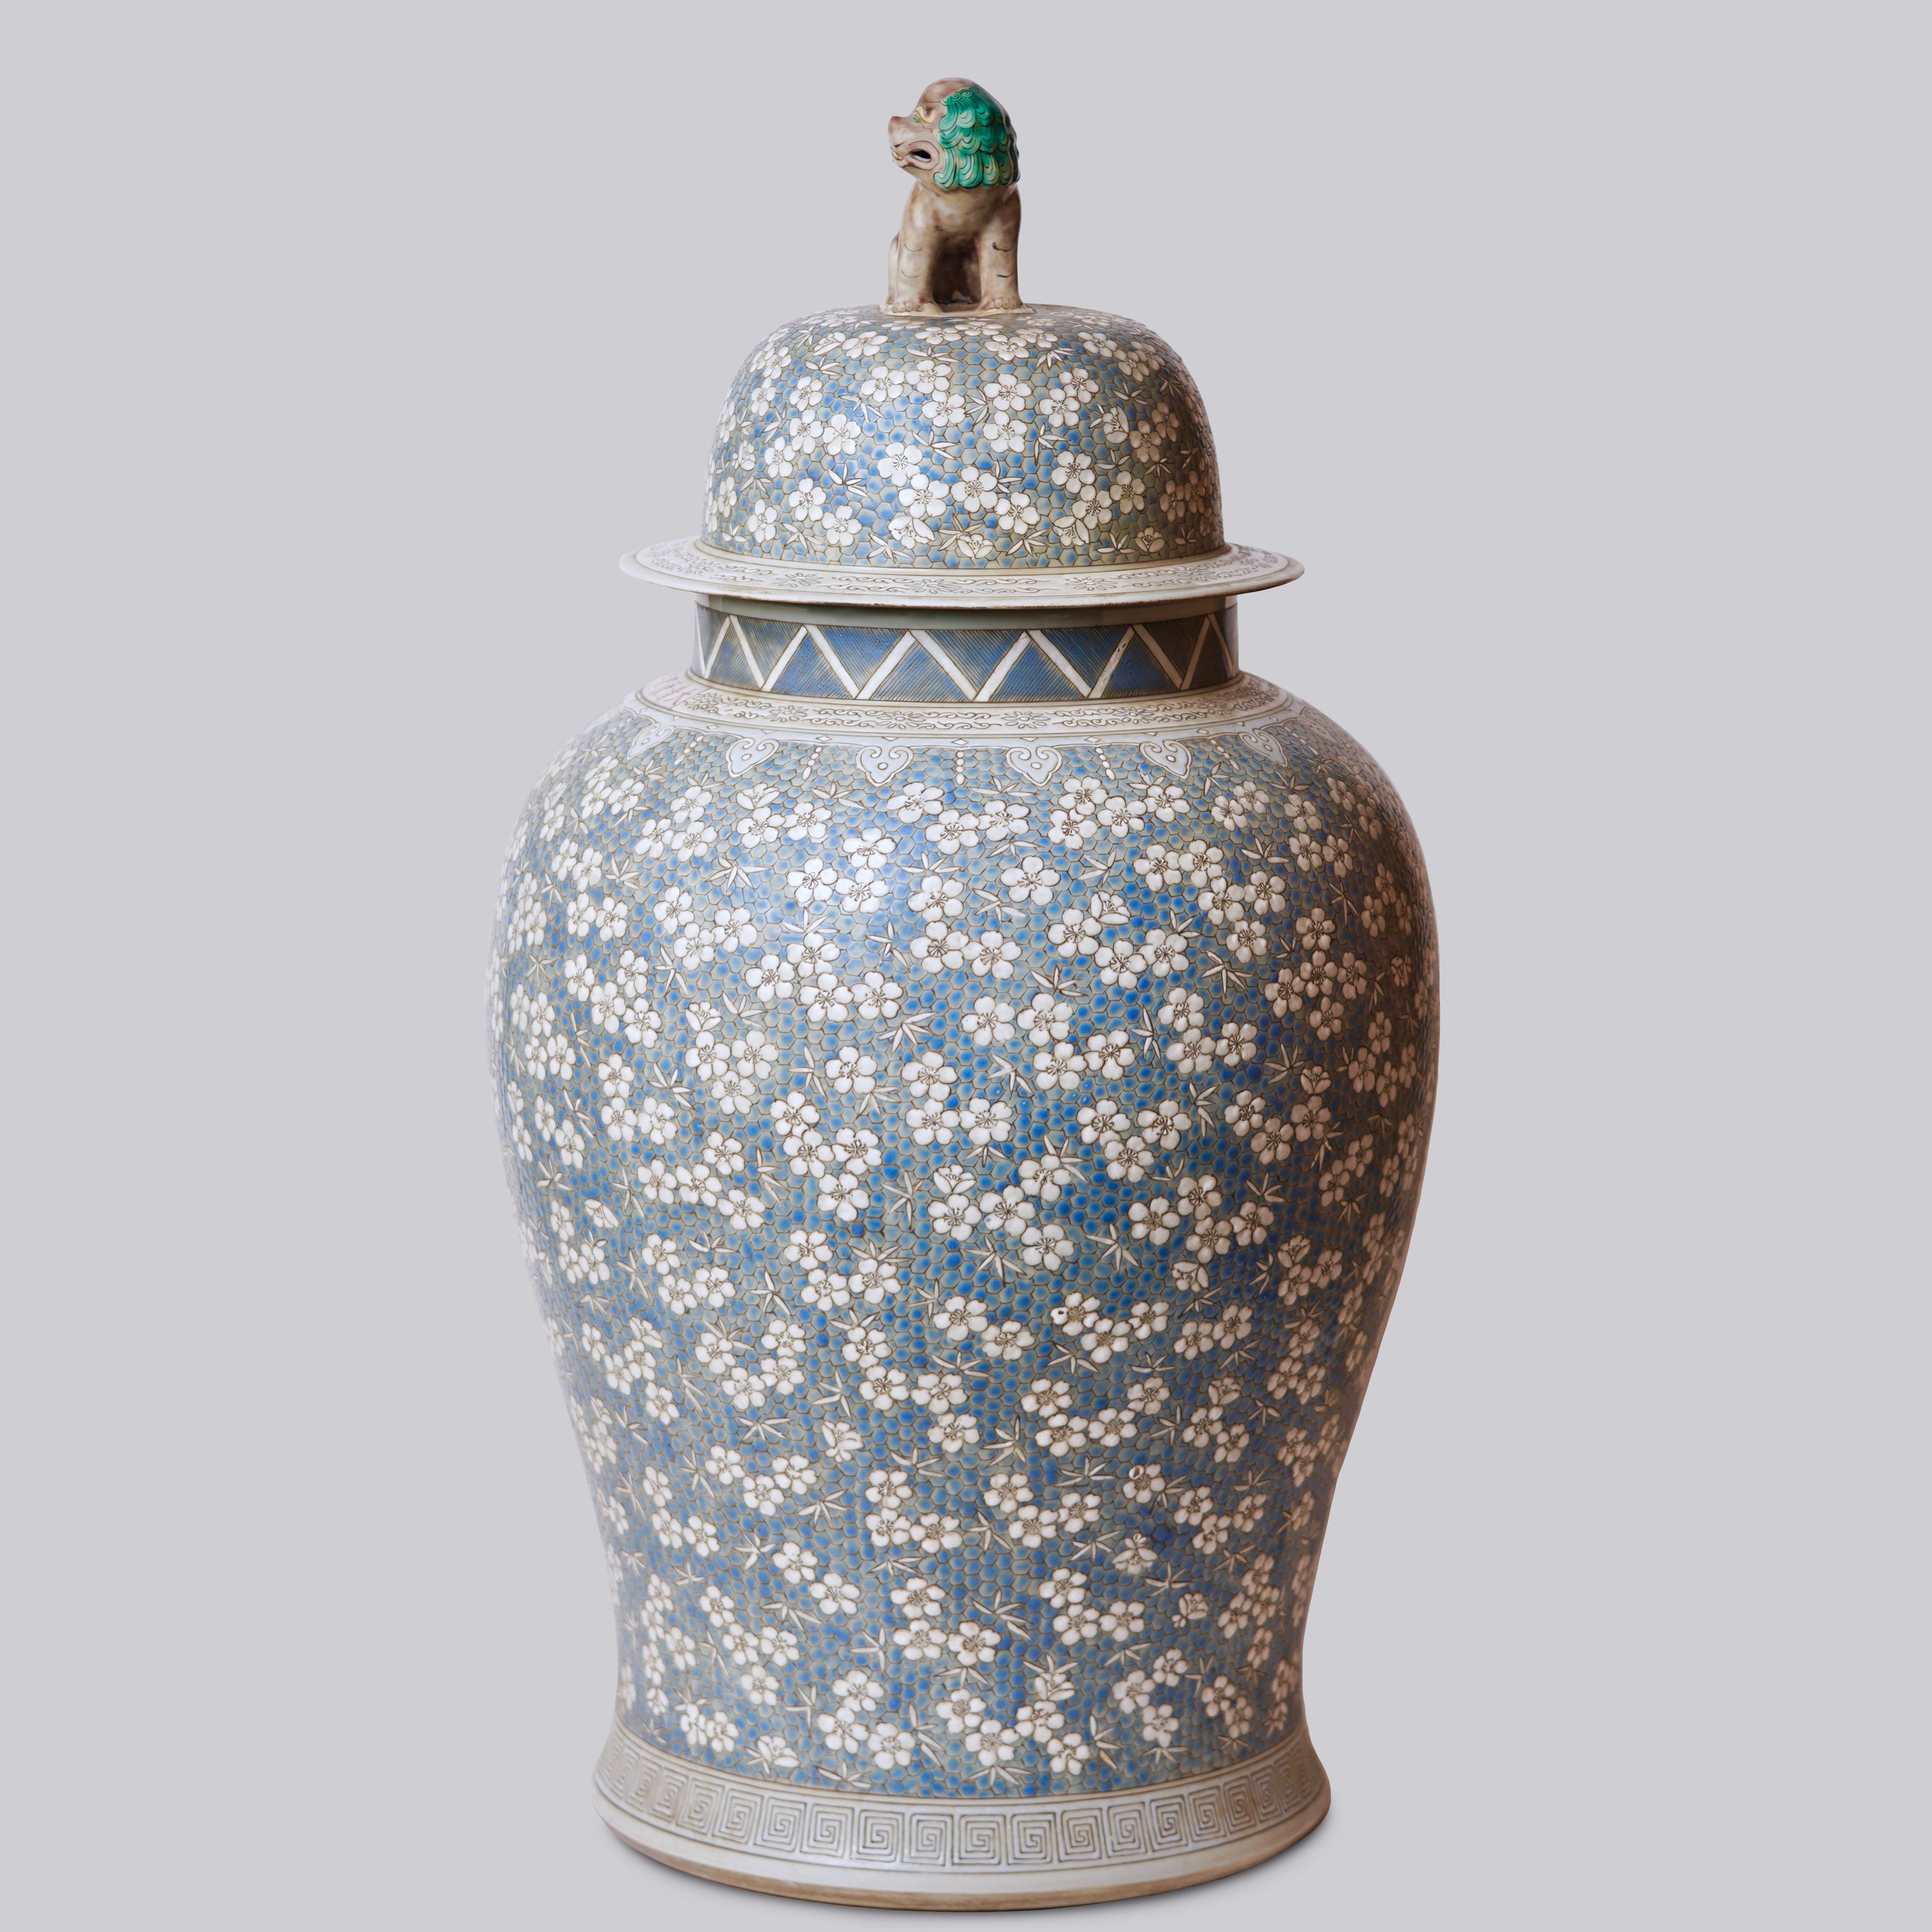 This temple jar is a traditional porcelain vessel from Jingdezhen, a town long distinguished by imperial patronage. An uncommon blue and grey pebbled and textured field contrasting with soft white cherry blossoms sets this vase apart from the usual